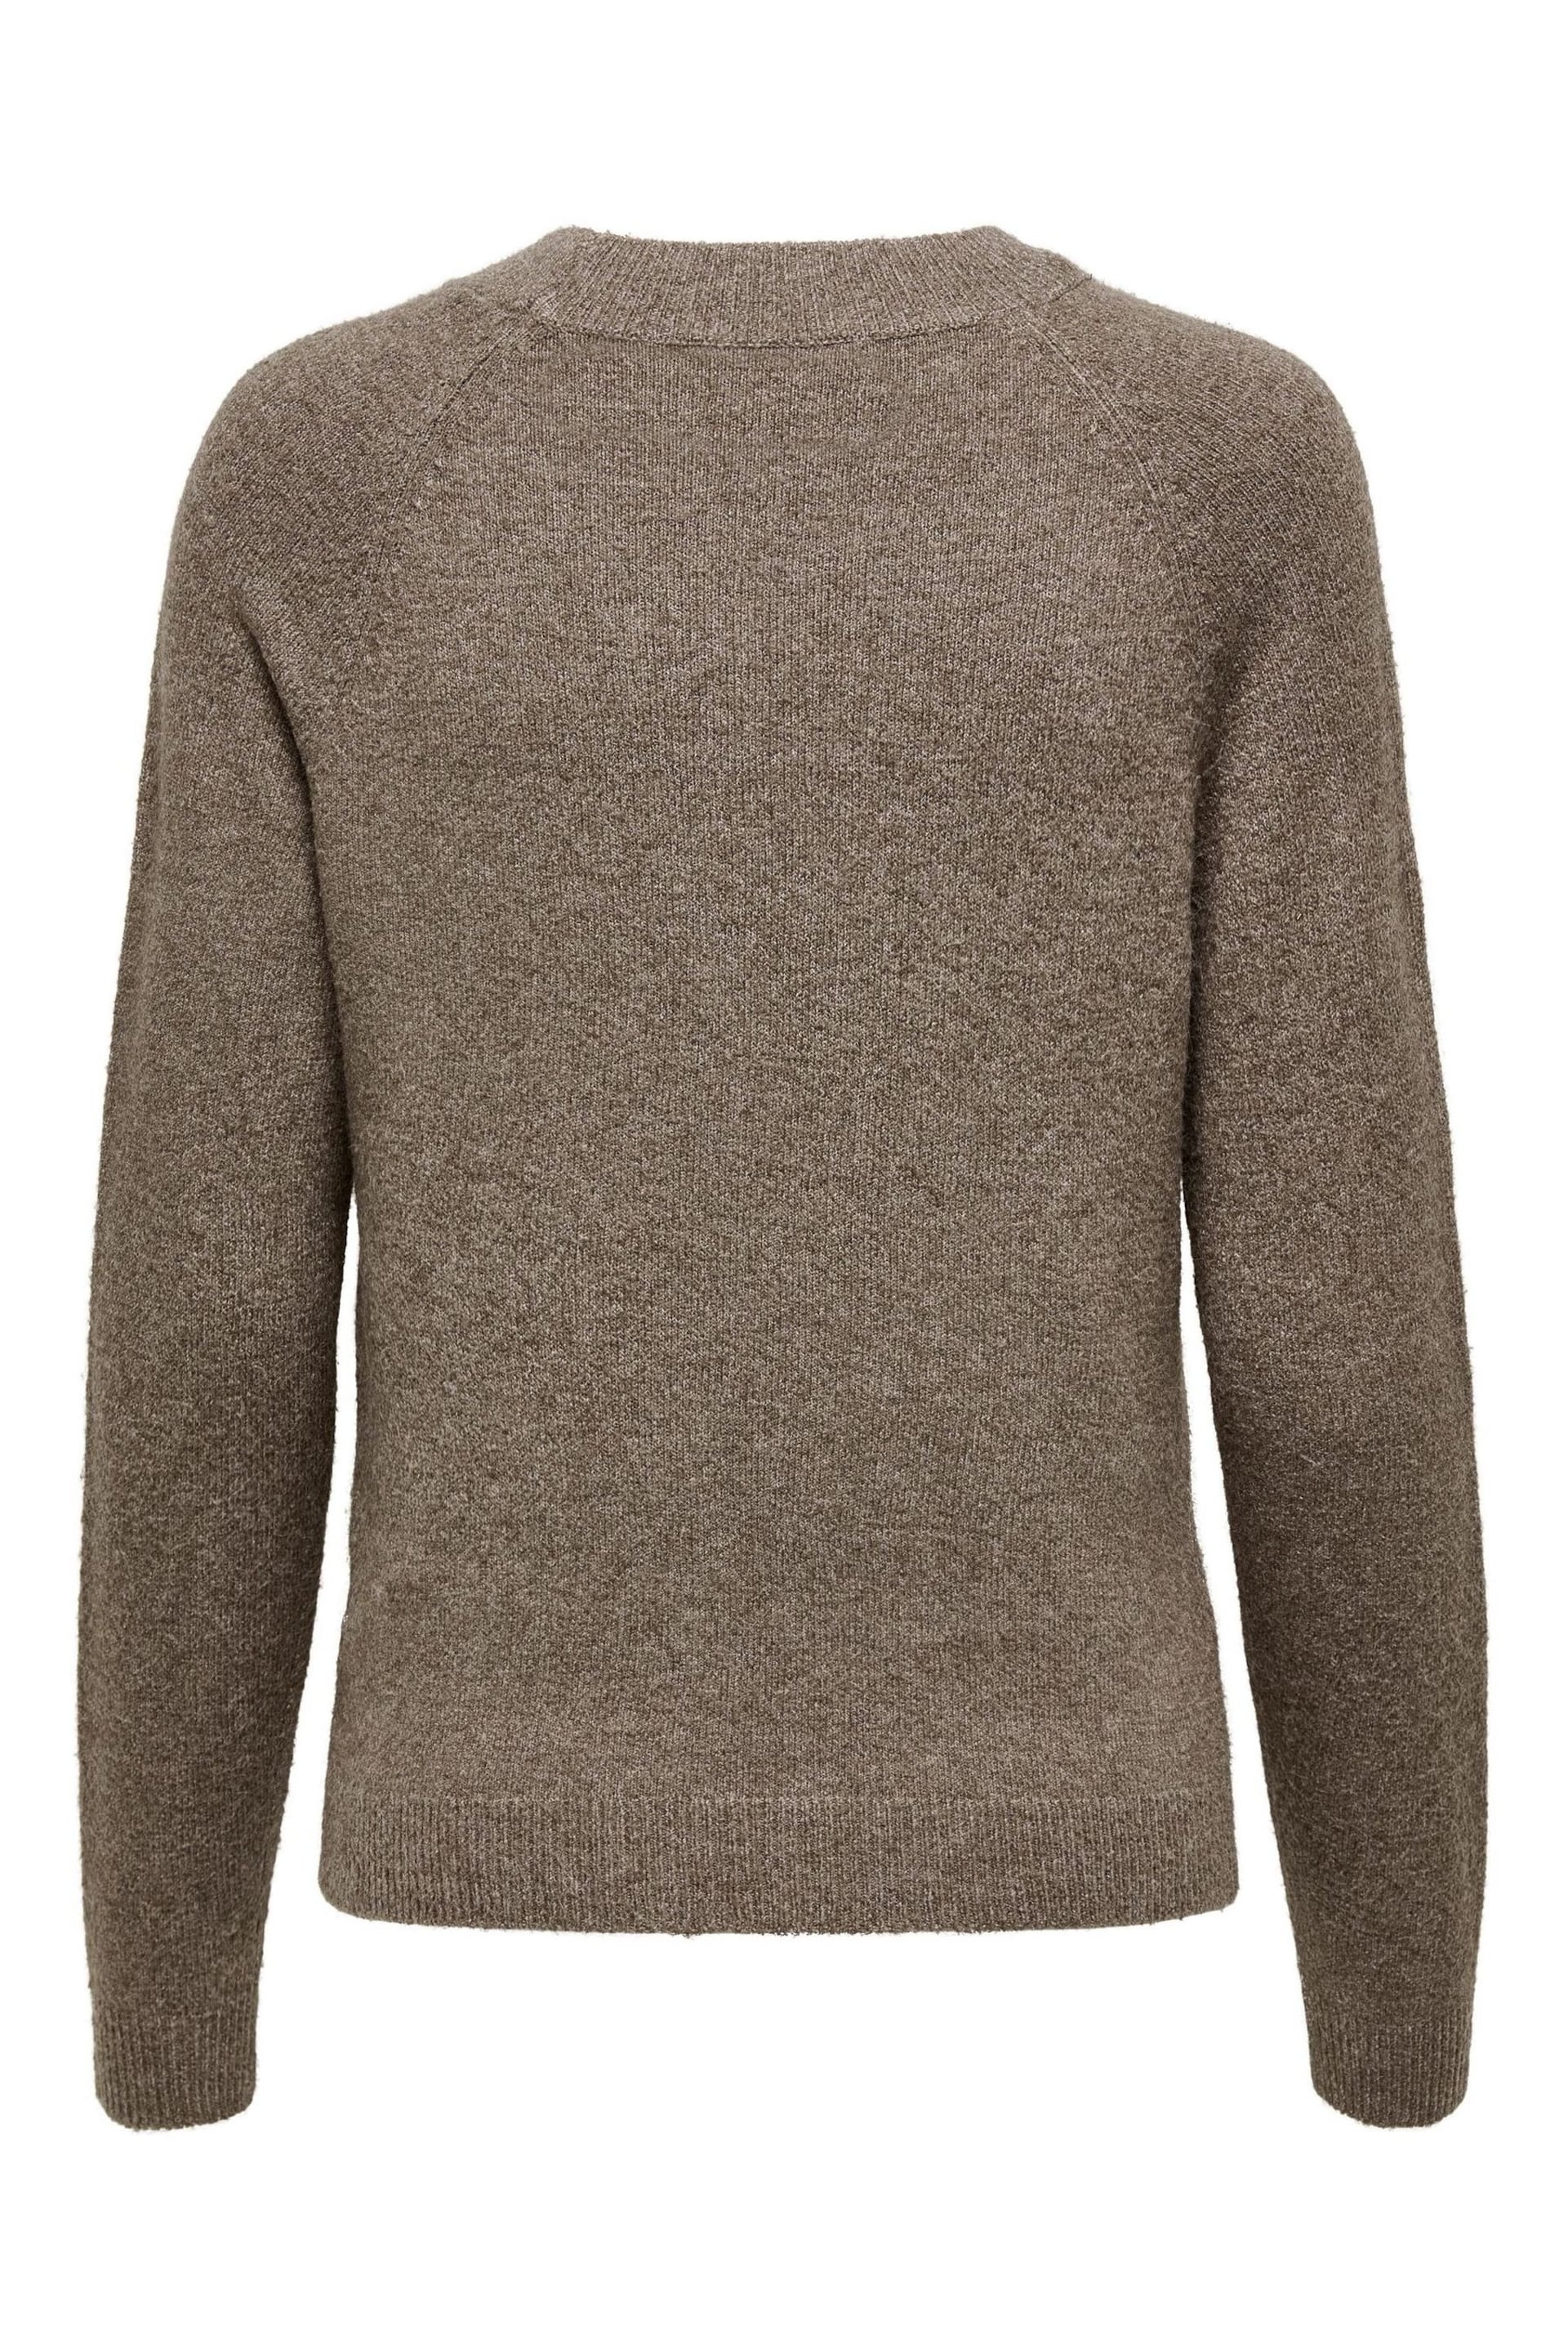 ONLY Brownie Round Neck Knitted Jumper - Image 7 of 8